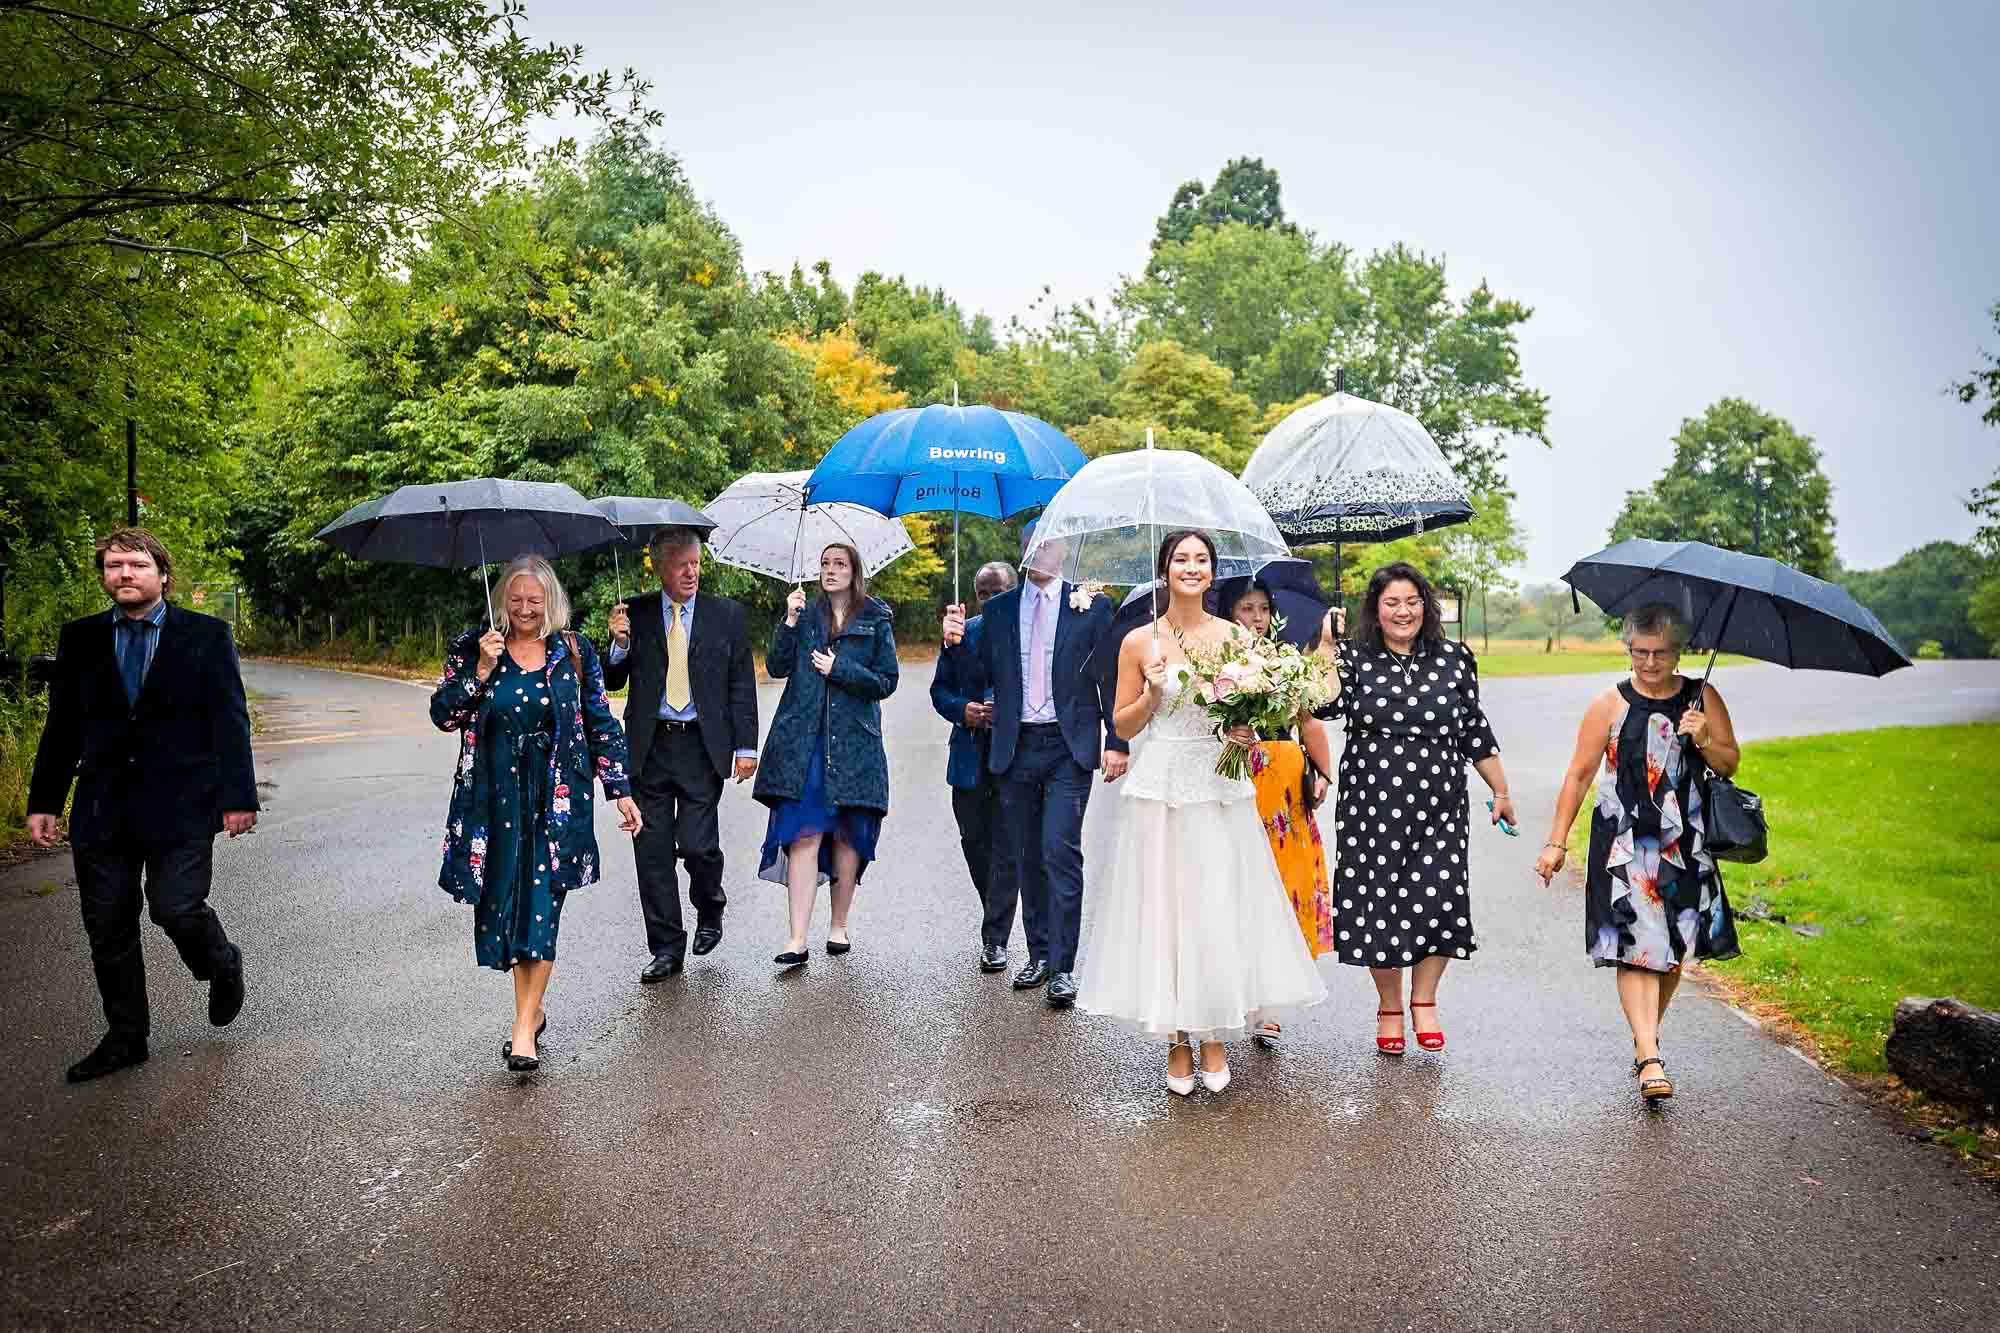 The bridal party leave Merton Register Office in the rain with their umbrellas